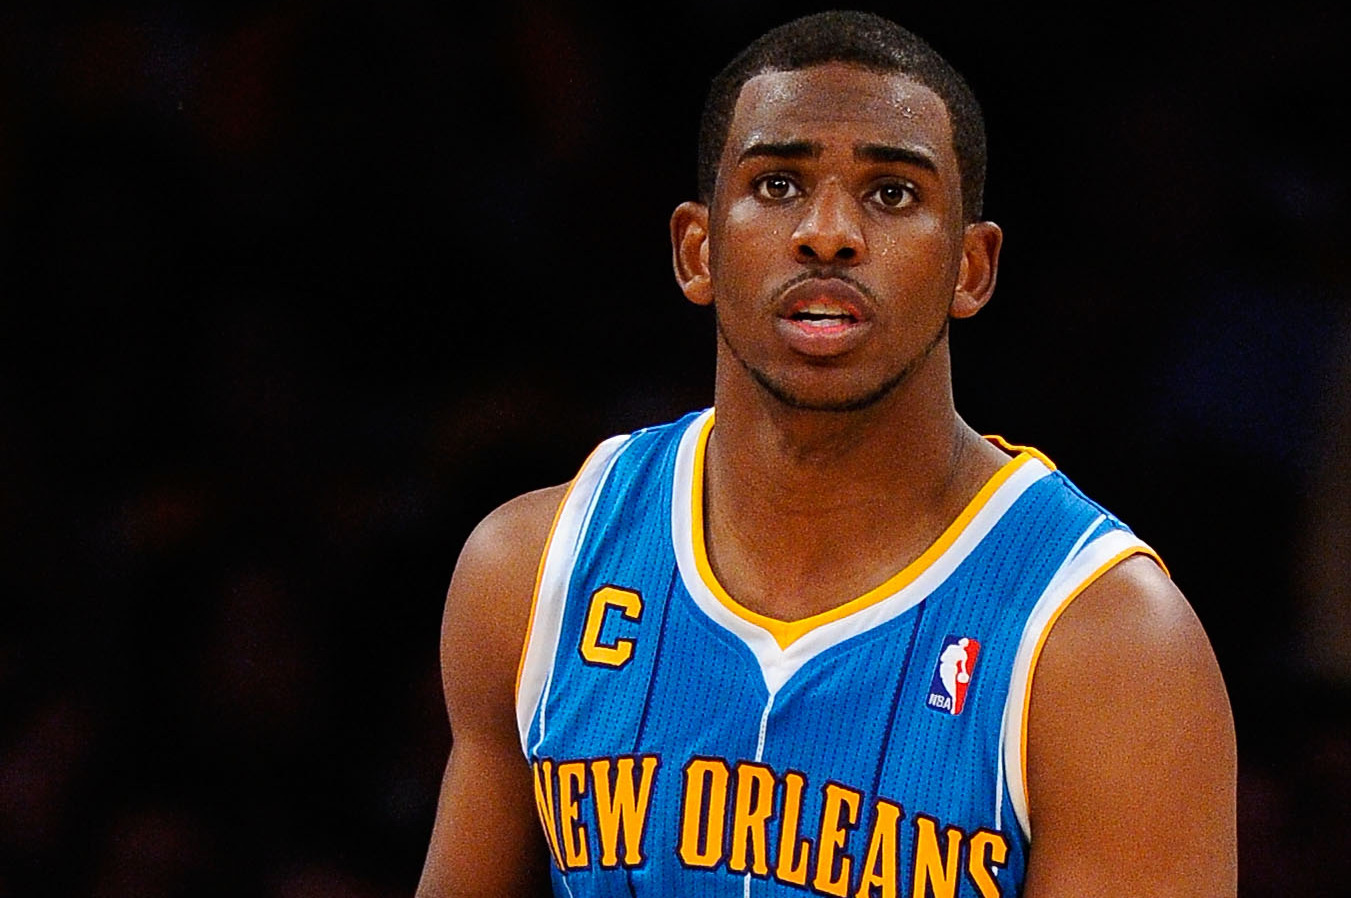 Could Chris Paul return to New Orleans?